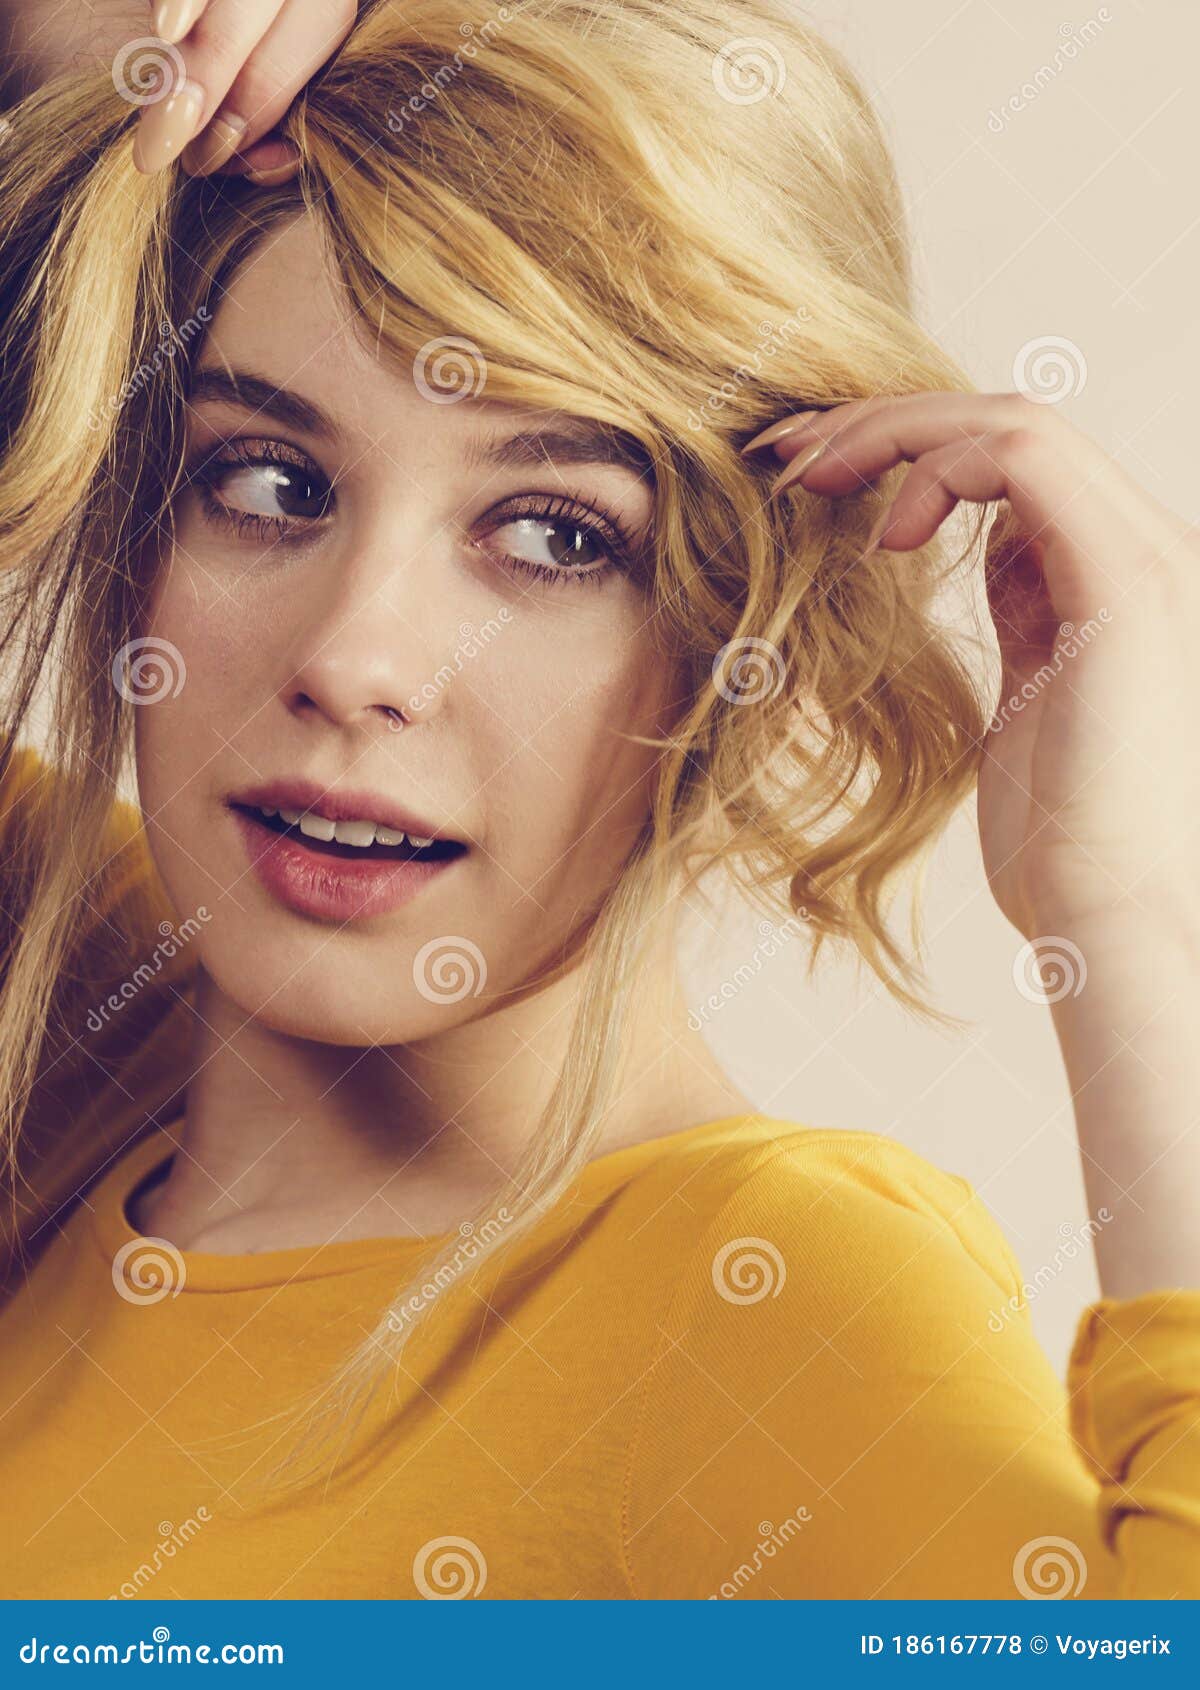 32 HQ Photos Long Blonde Hair Fringe / Full Fringe Long Hairstyles With Blonde Shades Full Dose Hair Styles Blonde Hair With Bangs Long Hair Styles